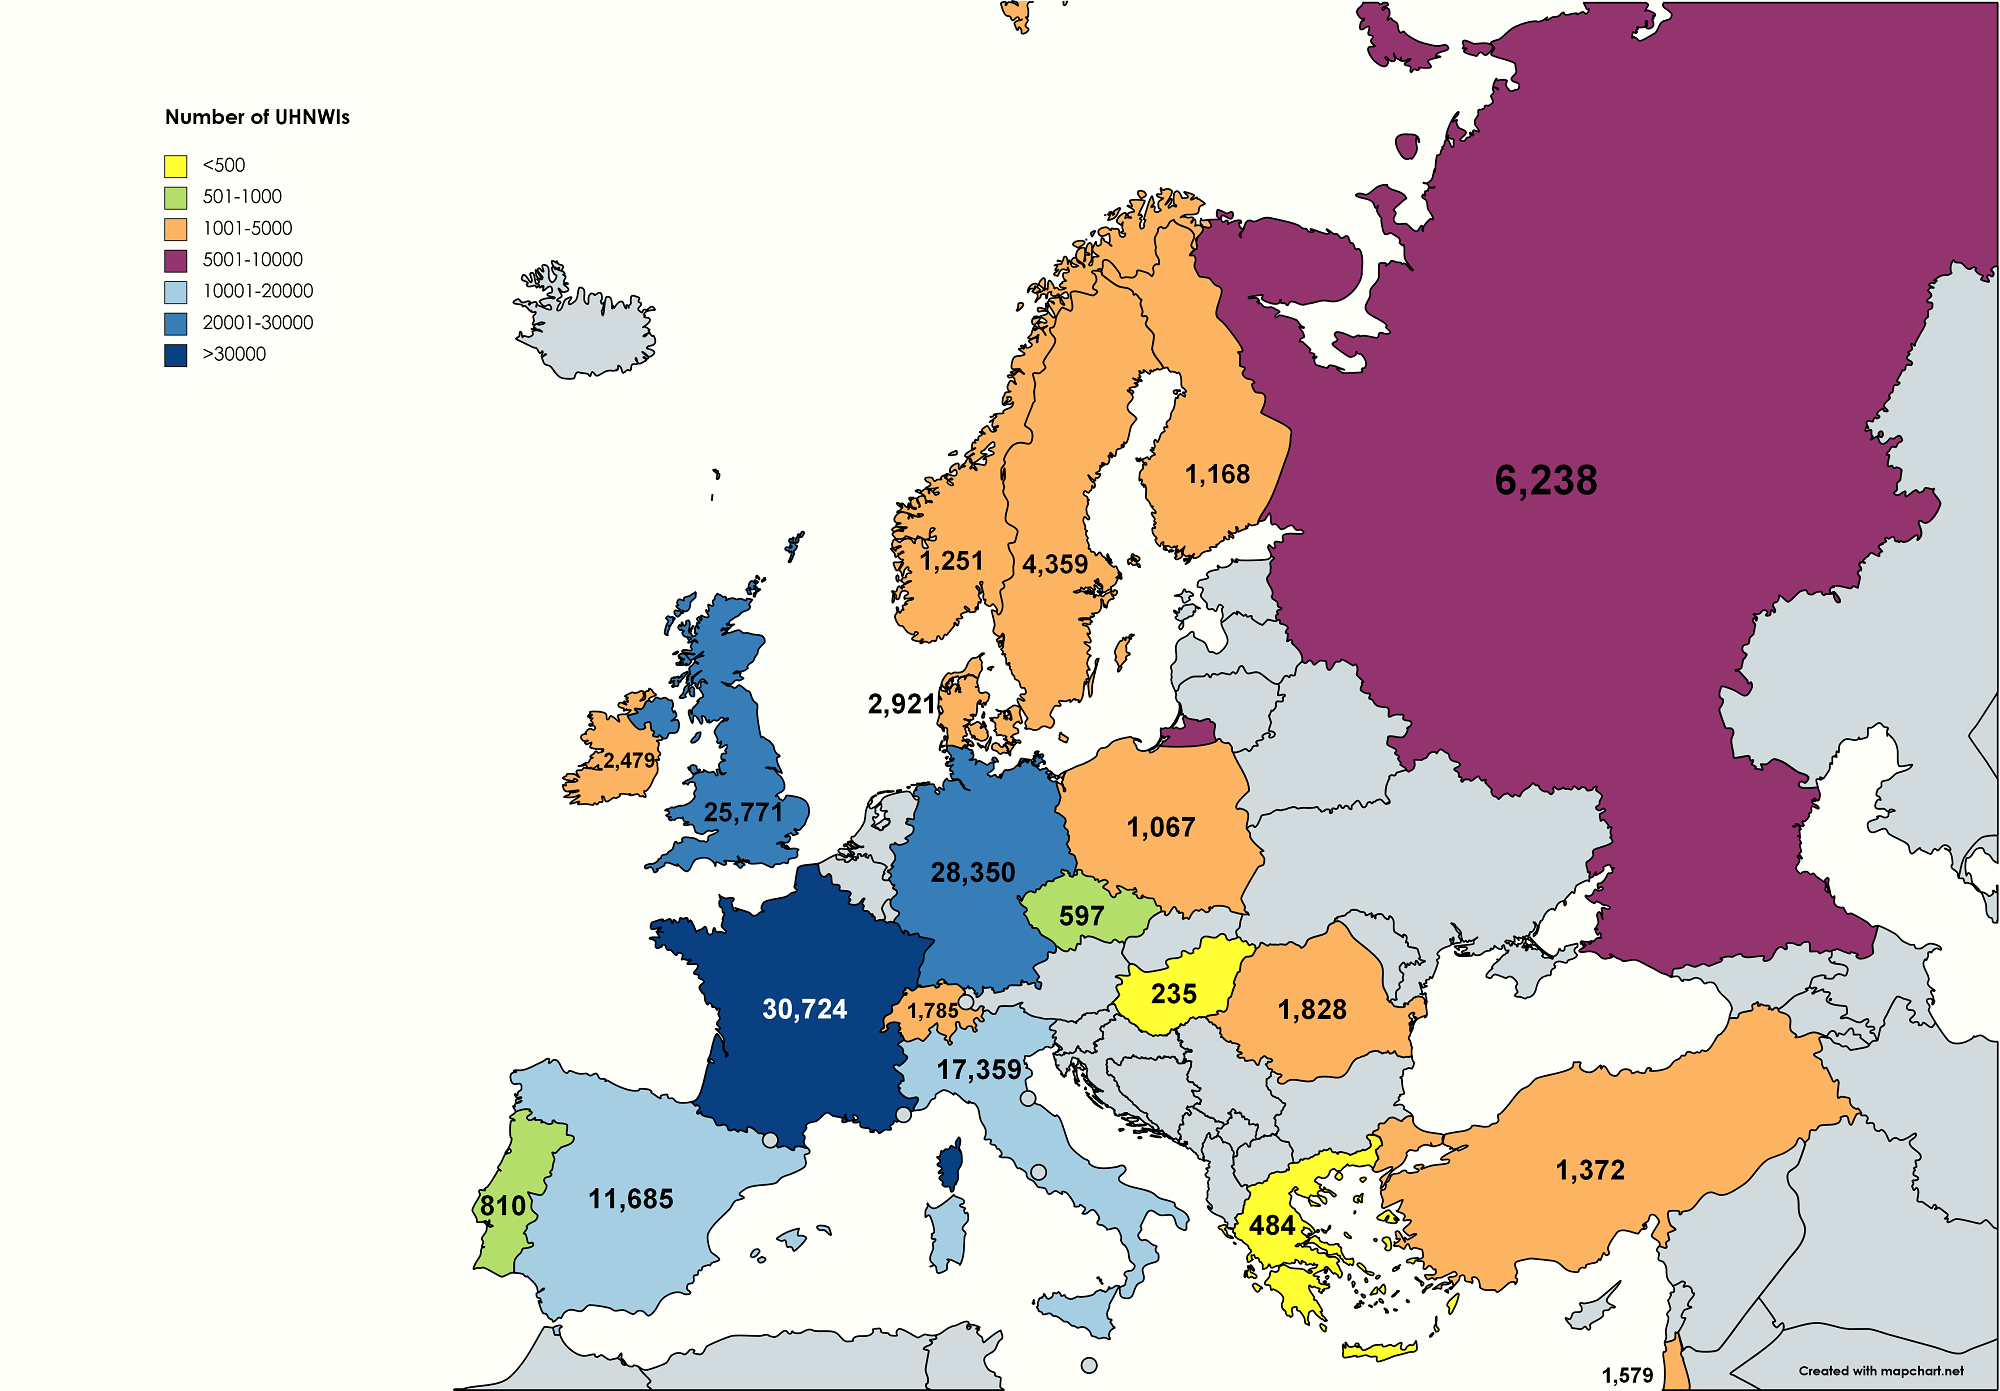 map of europe with stats on ultra-high net worth individuals